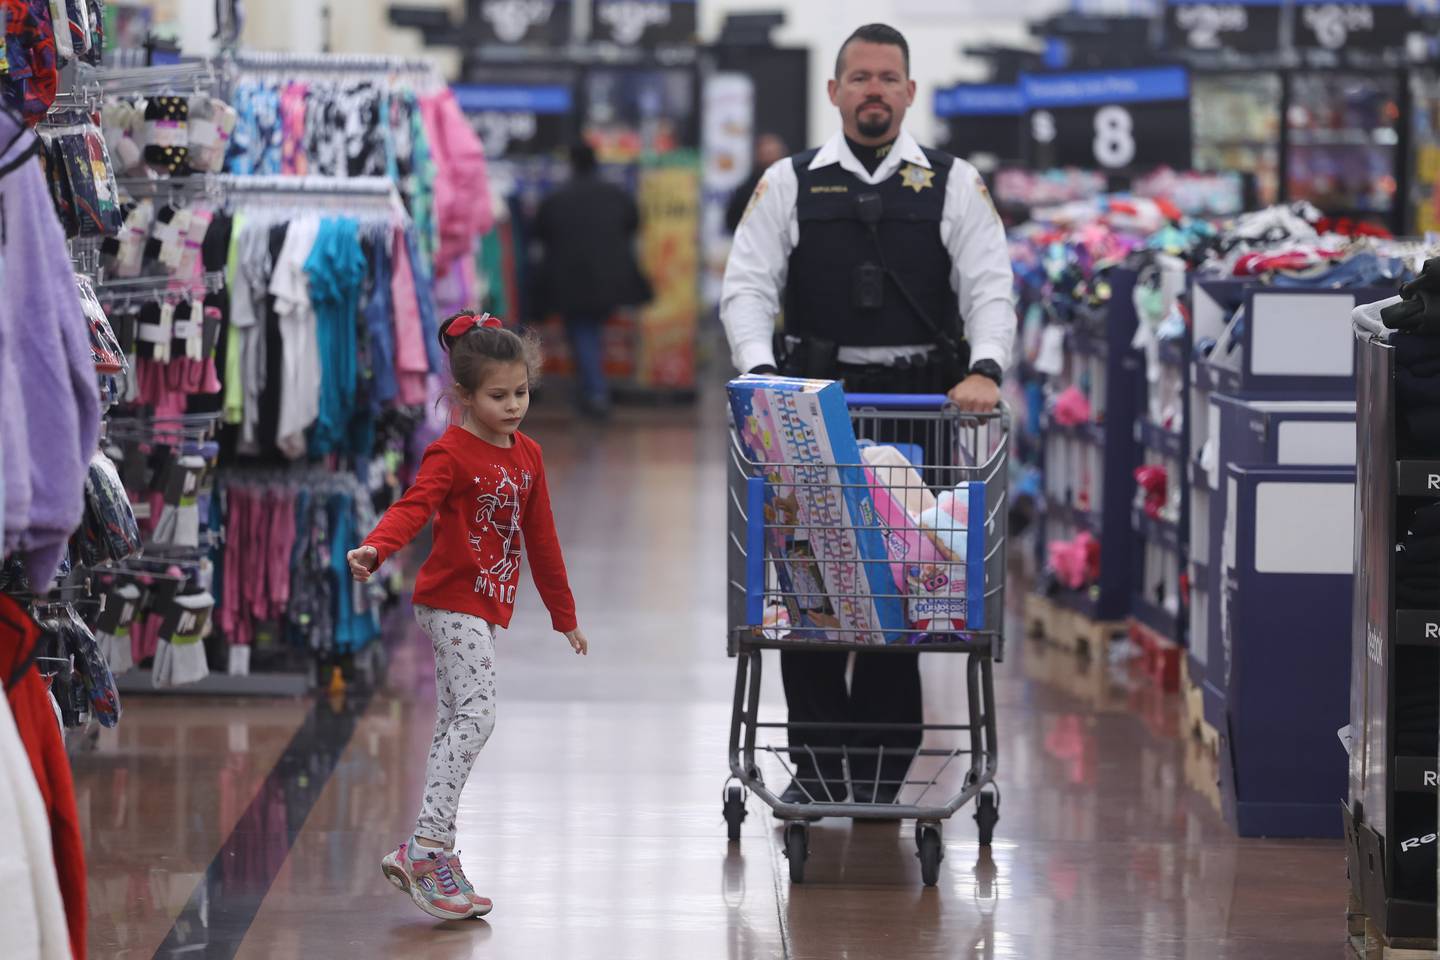 Lily, 6, dances down the aisle as she shops with Sgt. Kevin Sepulveda at the annual Santa Cop at Walmart in Joliet.